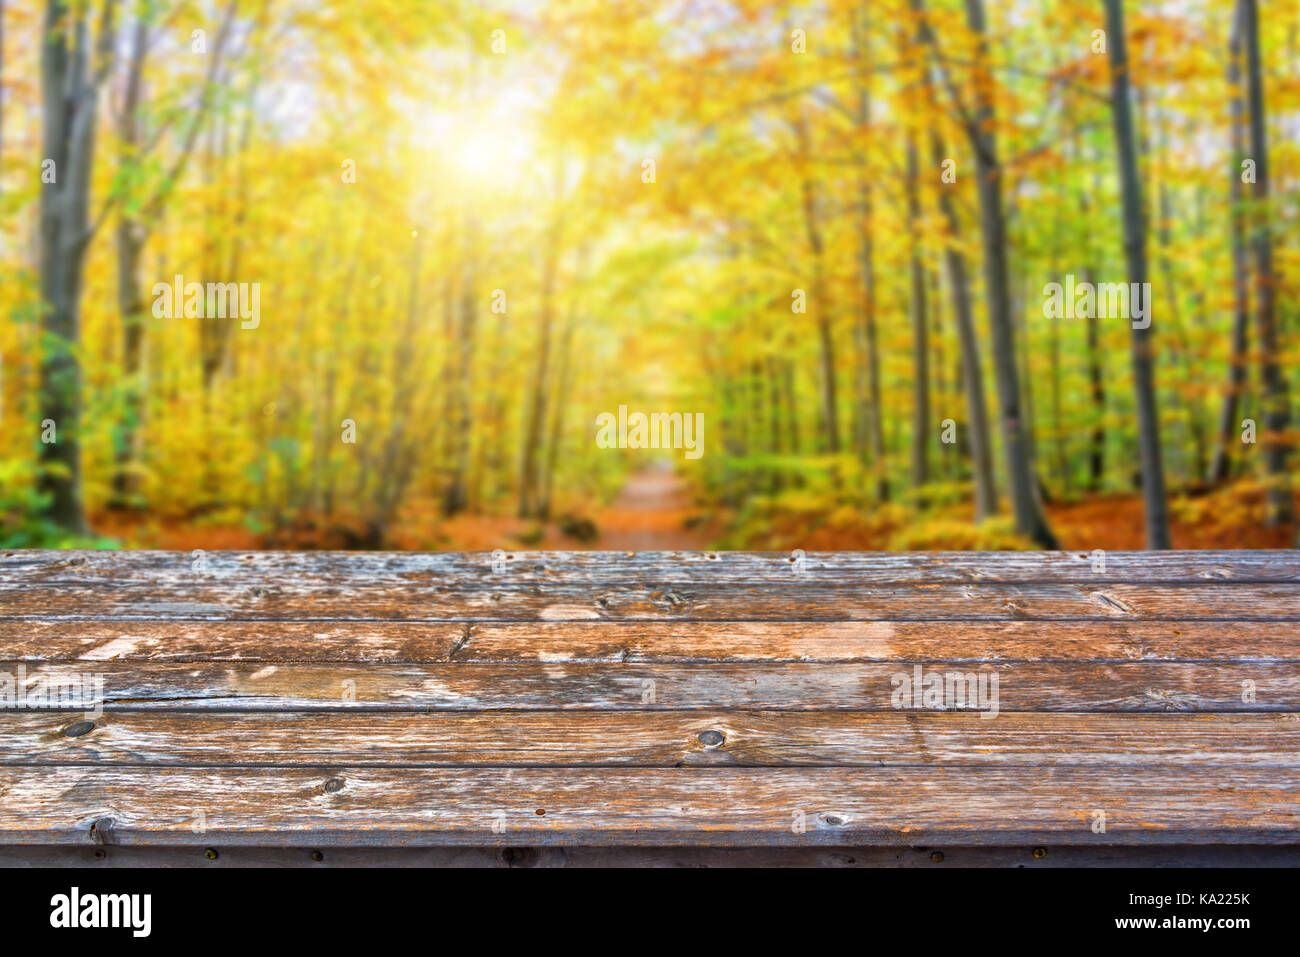 Empty wooden table top, sunny forest in autumn background, ready to use for display or montage of your products Stock Photo